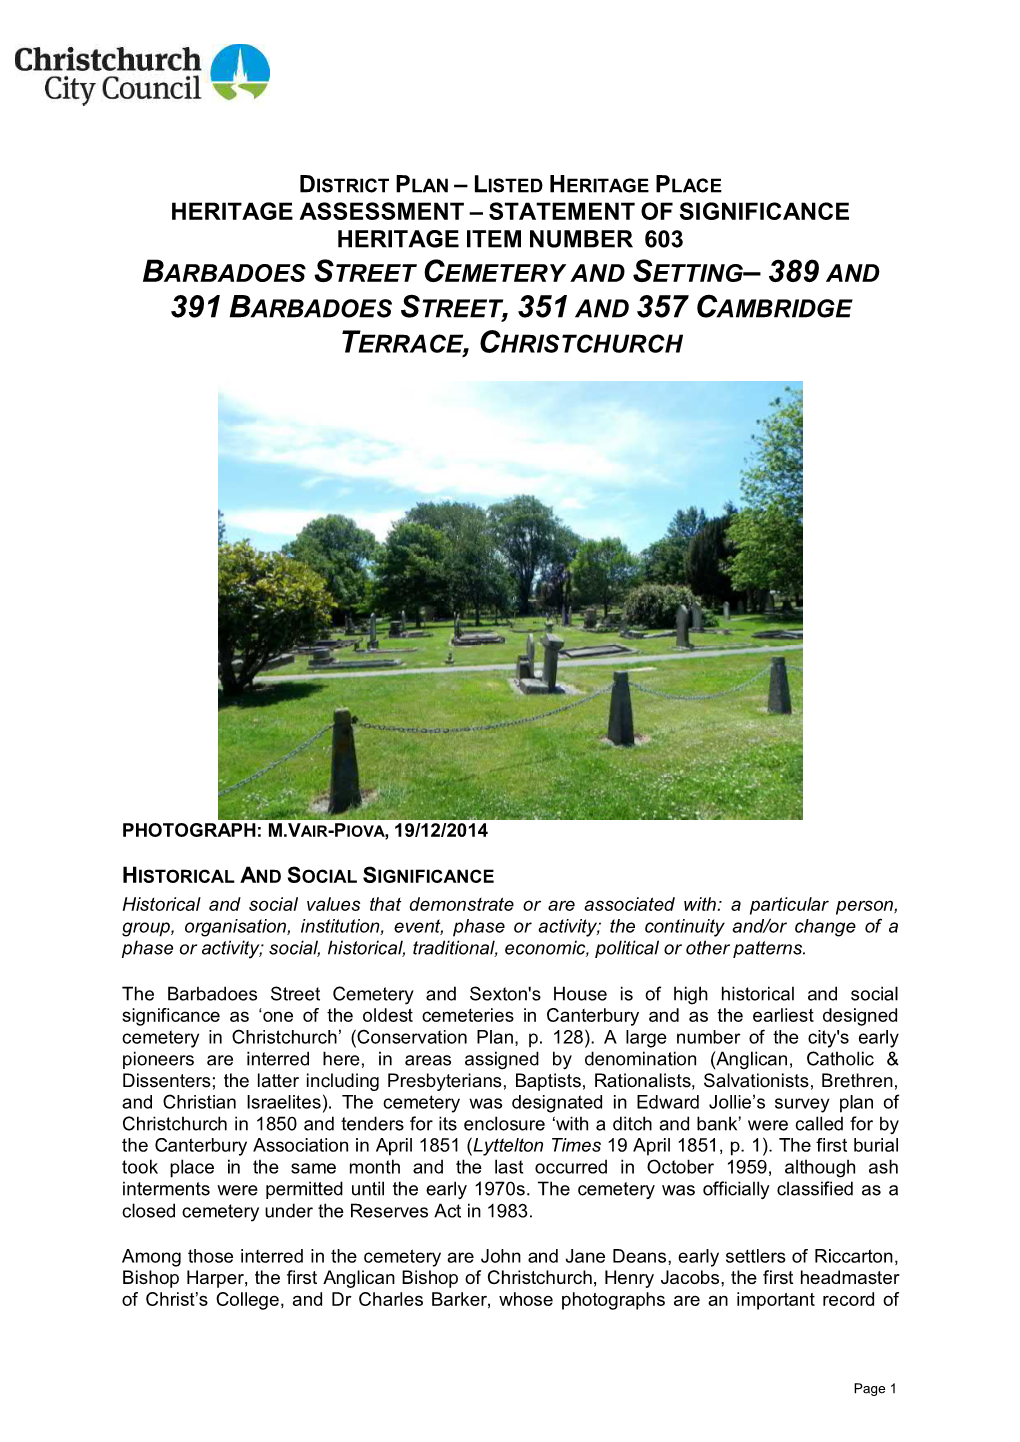 Barbadoes Street Cemetery and Setting– 389 and 391 Barbadoes Street, 351 and 357 Cambridge Terrace,Christchurch